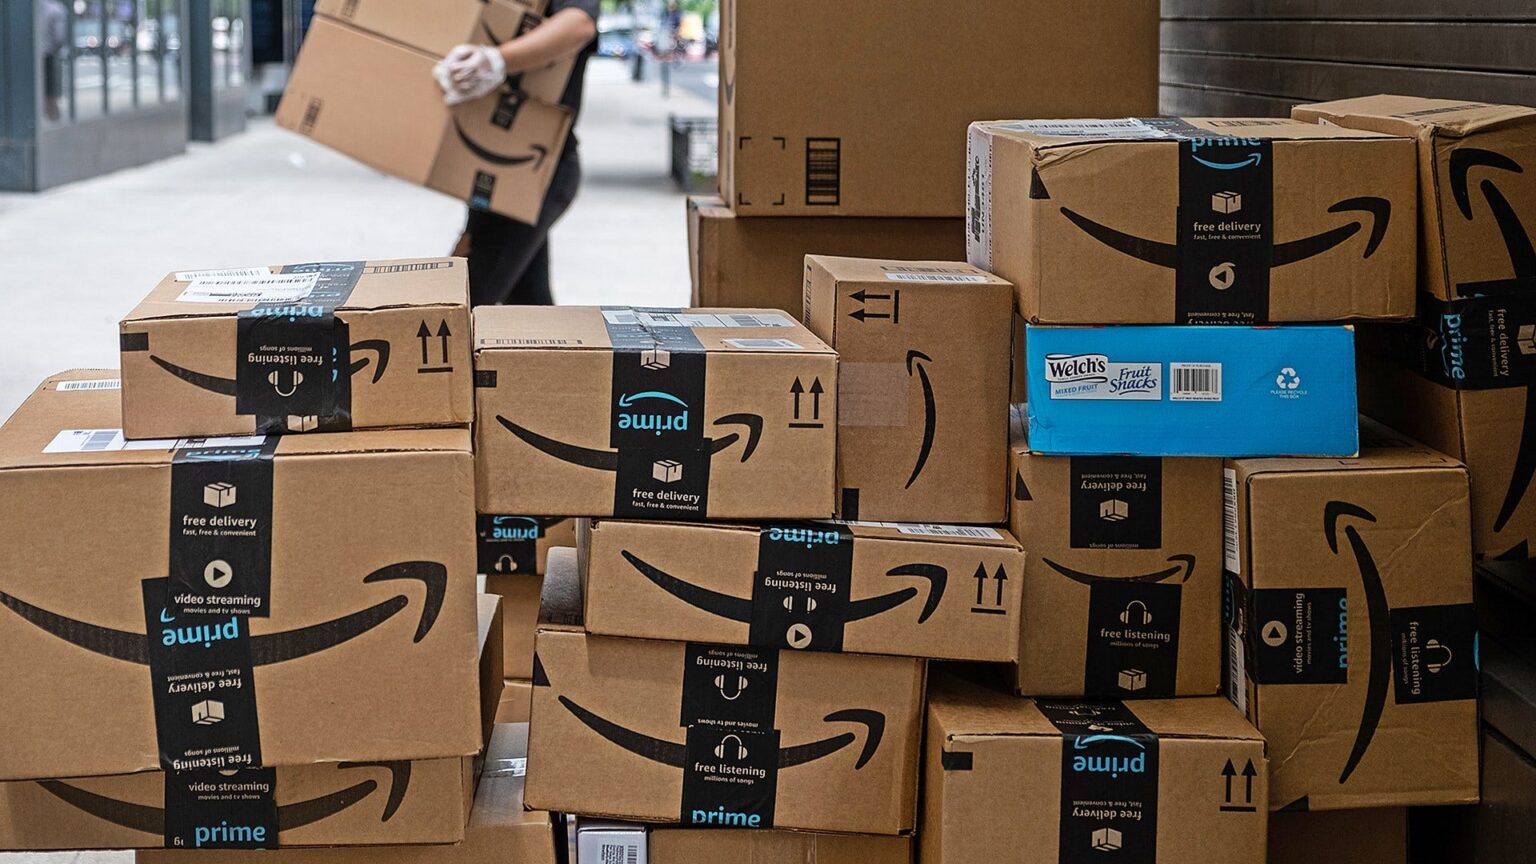 Does Amazon Accept Afterpay? Talk Radio News